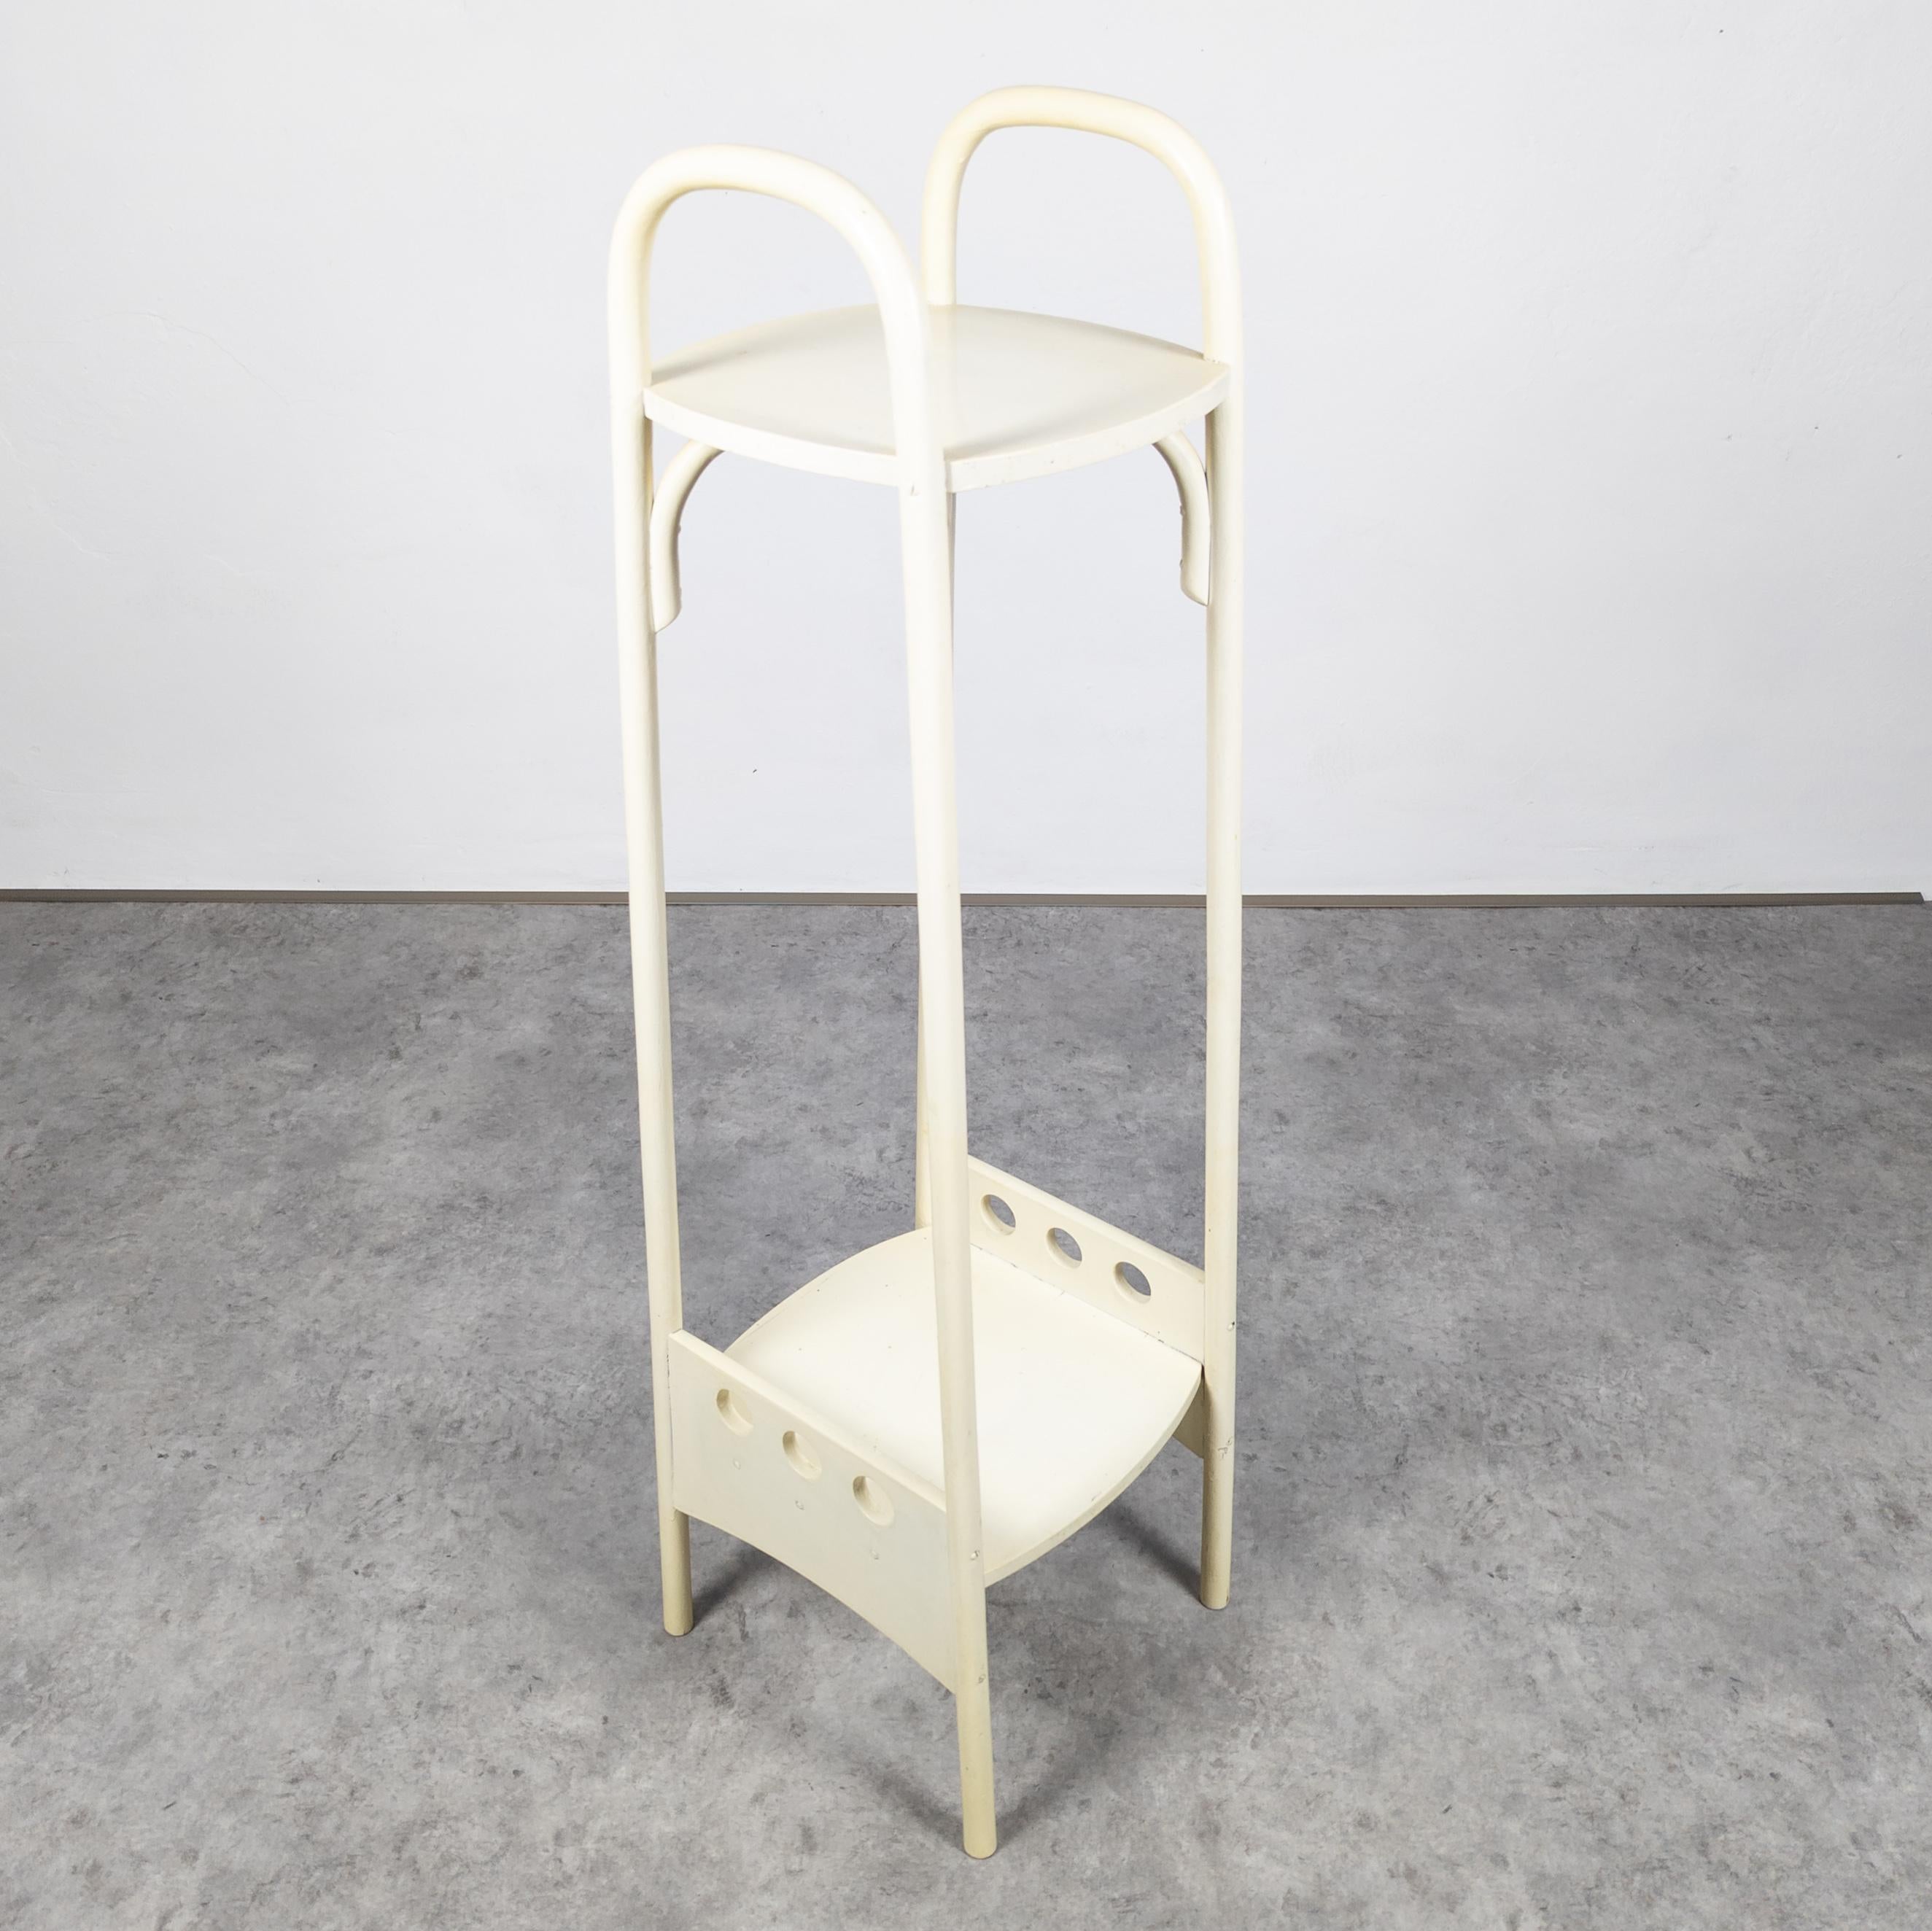 Rare modernist flower / plant stand designed by famous Viennese architect Josef Hoffmann. Manufactured by Thonet. Featured in 1906 catalogue. White lacquered bent beech. In very good original condition with beautiful patina.